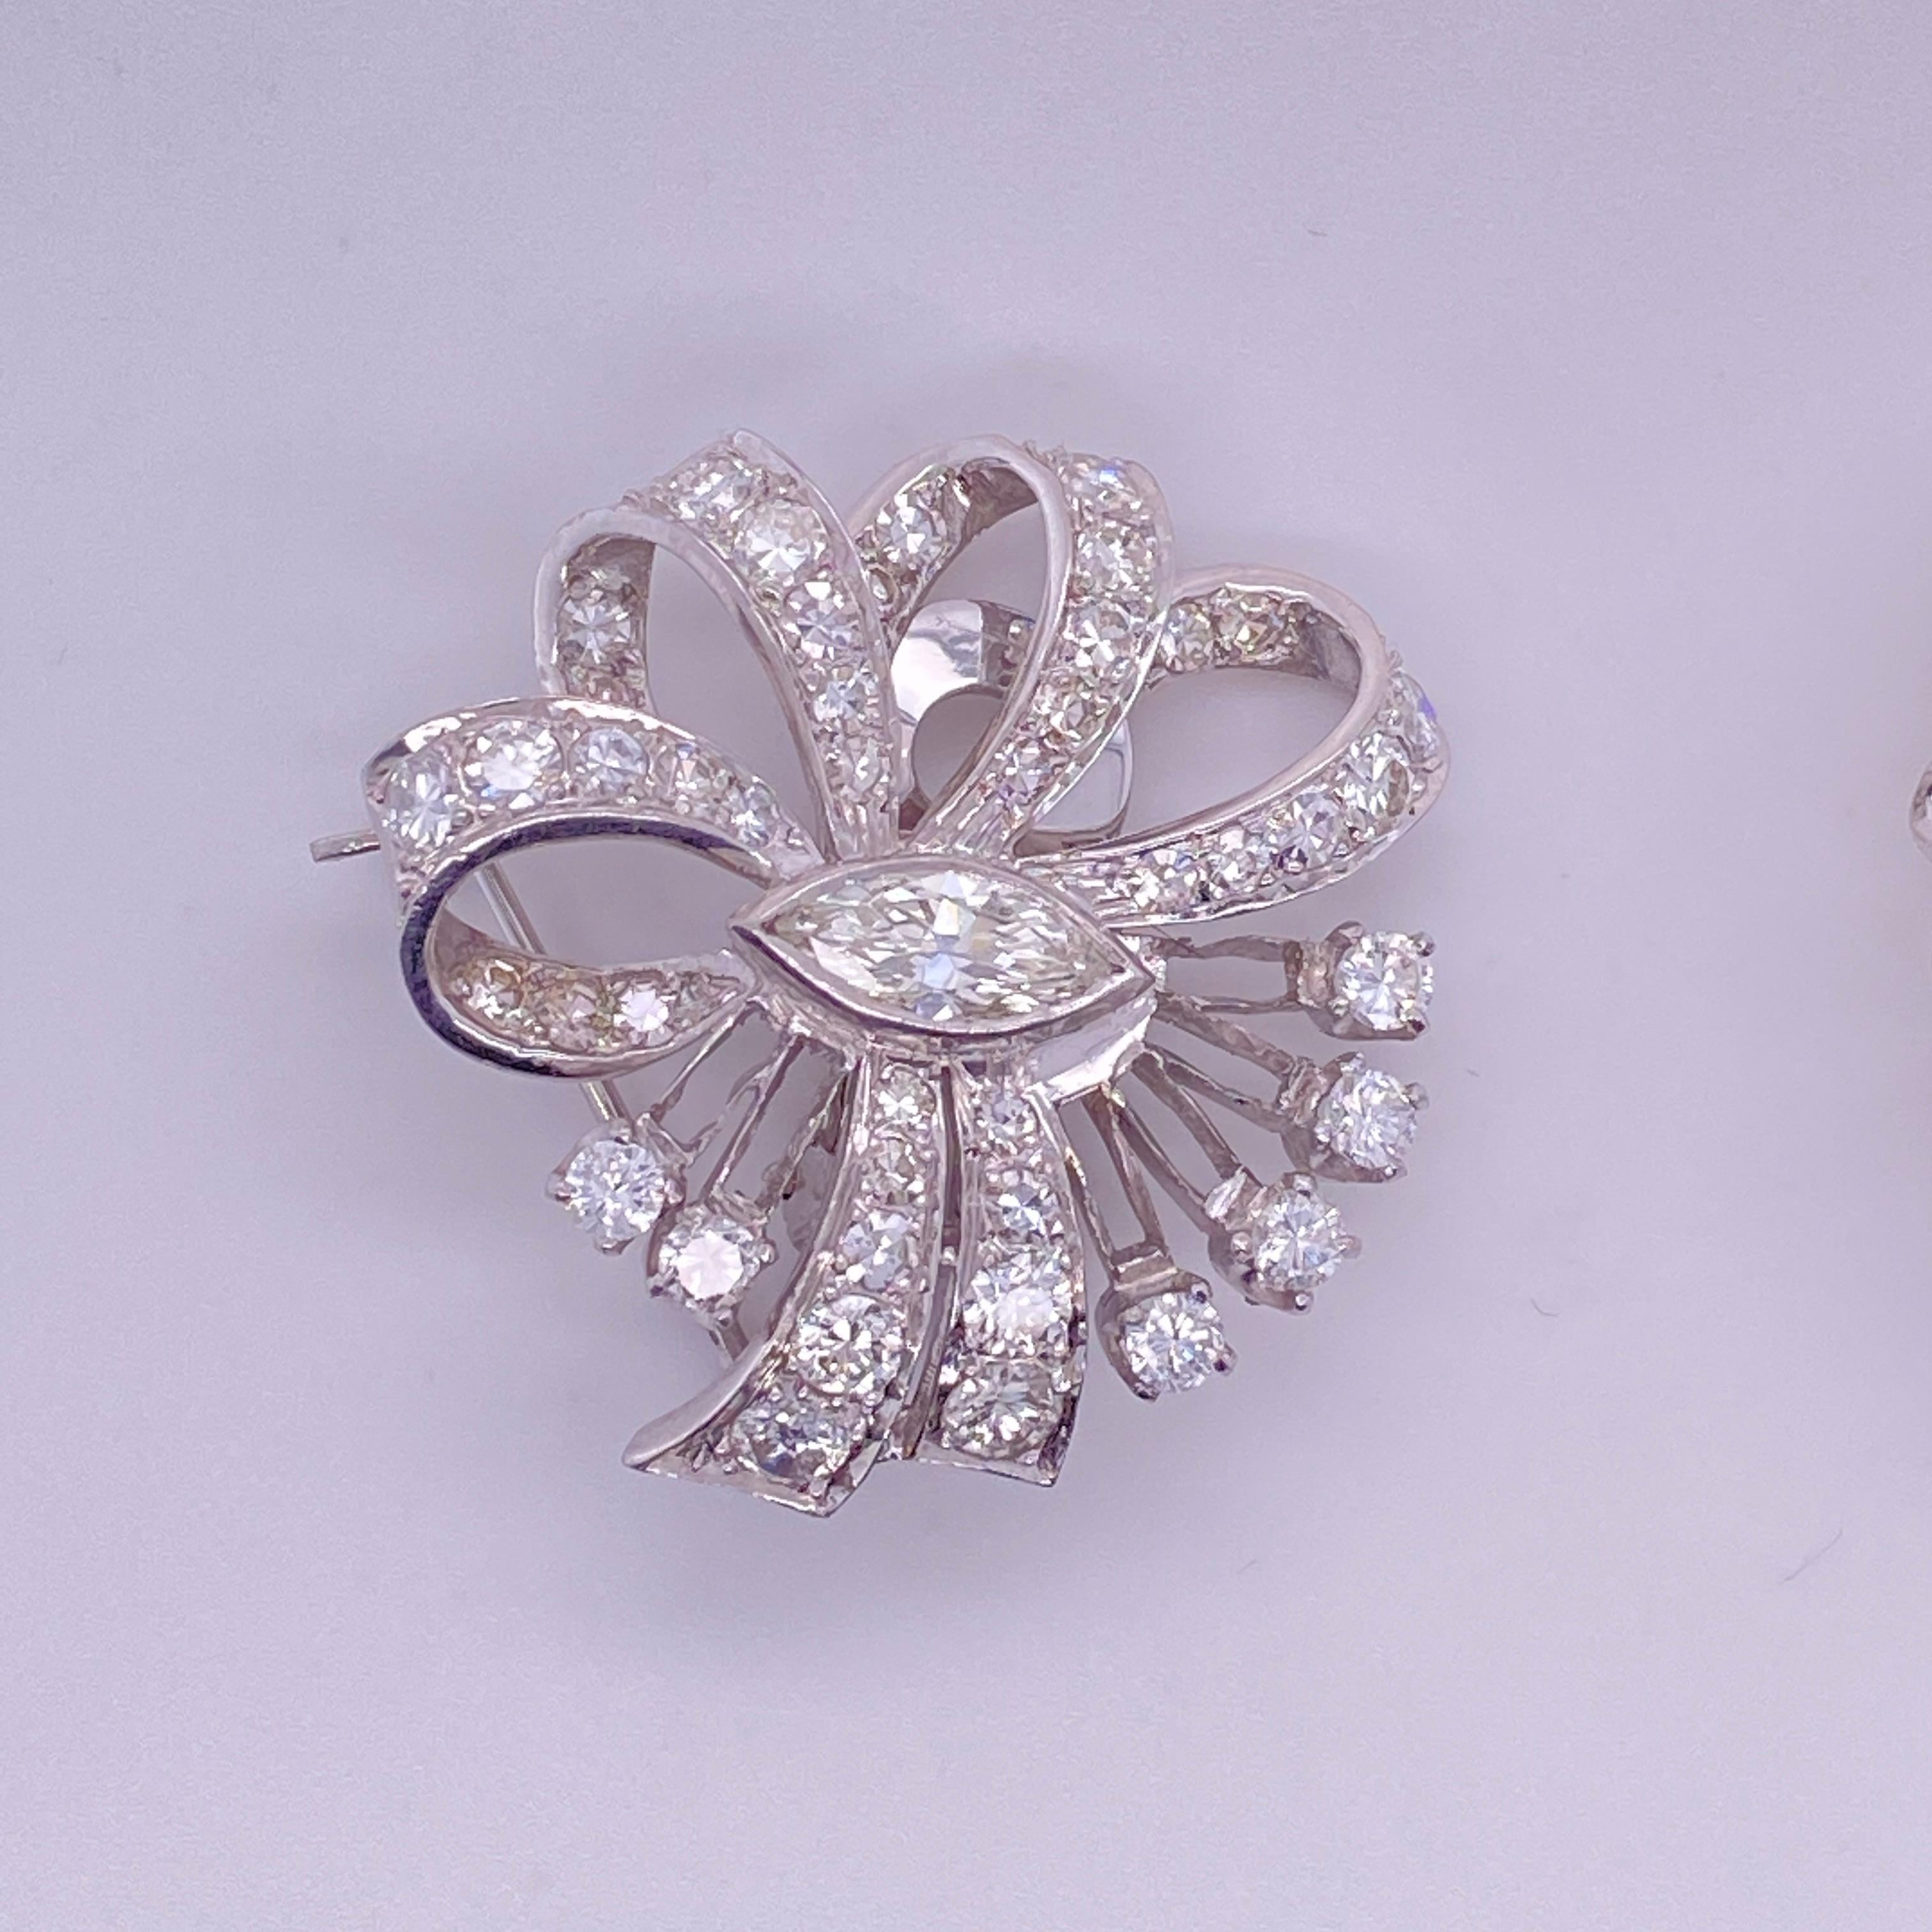 Edwardian, Cluster, Diamond Clip-On Earrings with Pin-Backs 3